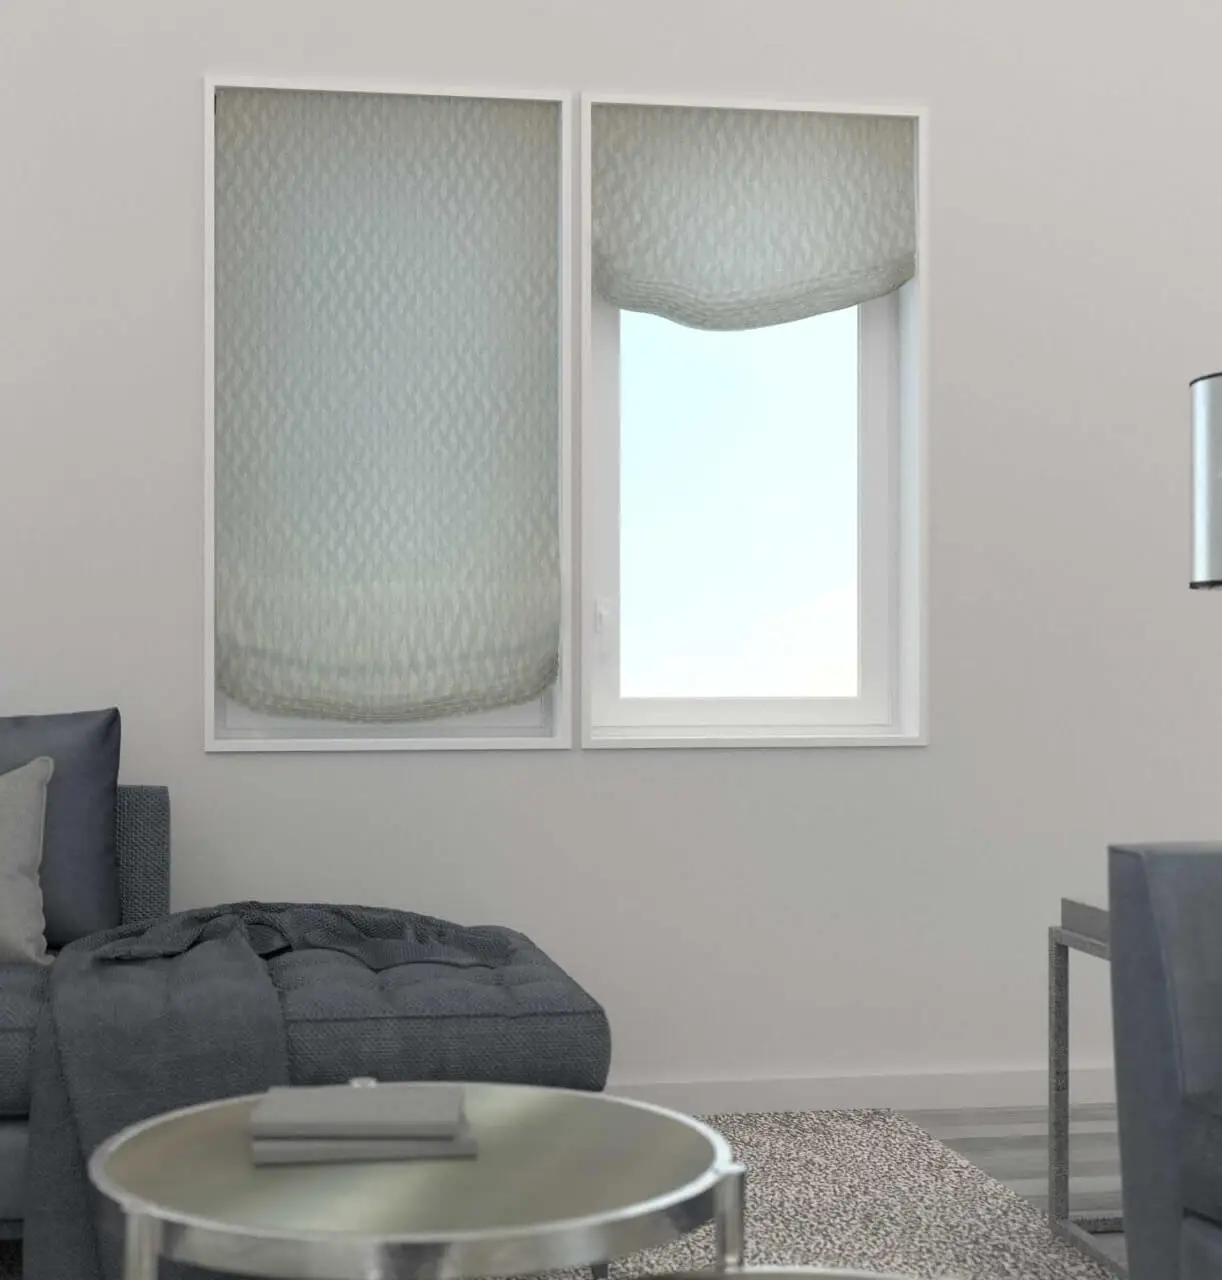  Relaxed Roman Shades - Elite